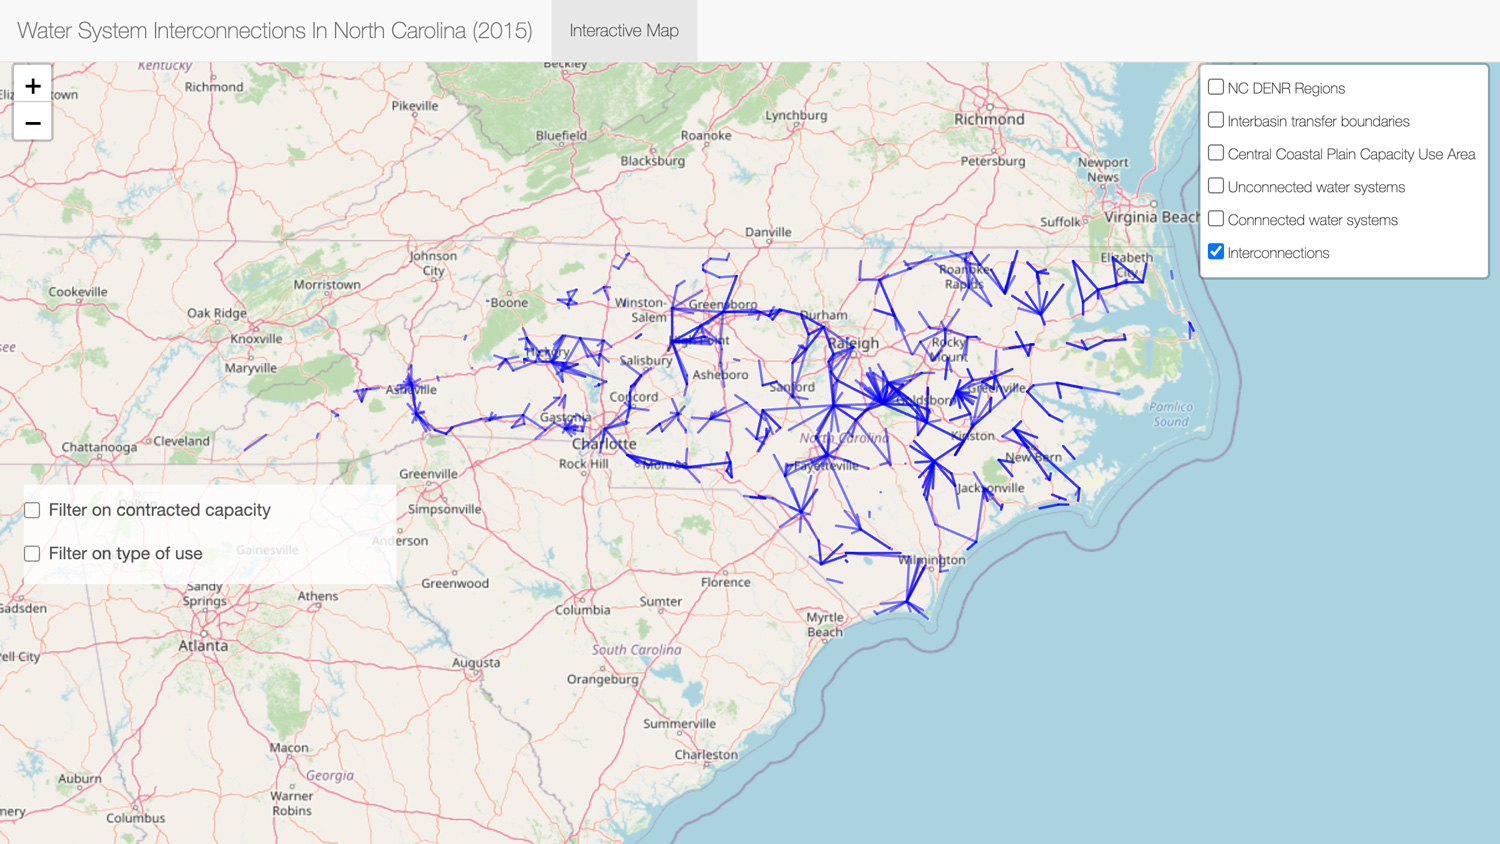 Preview of data and information contained at Interactive Map Of Community Water System Interconnections In North Carolina